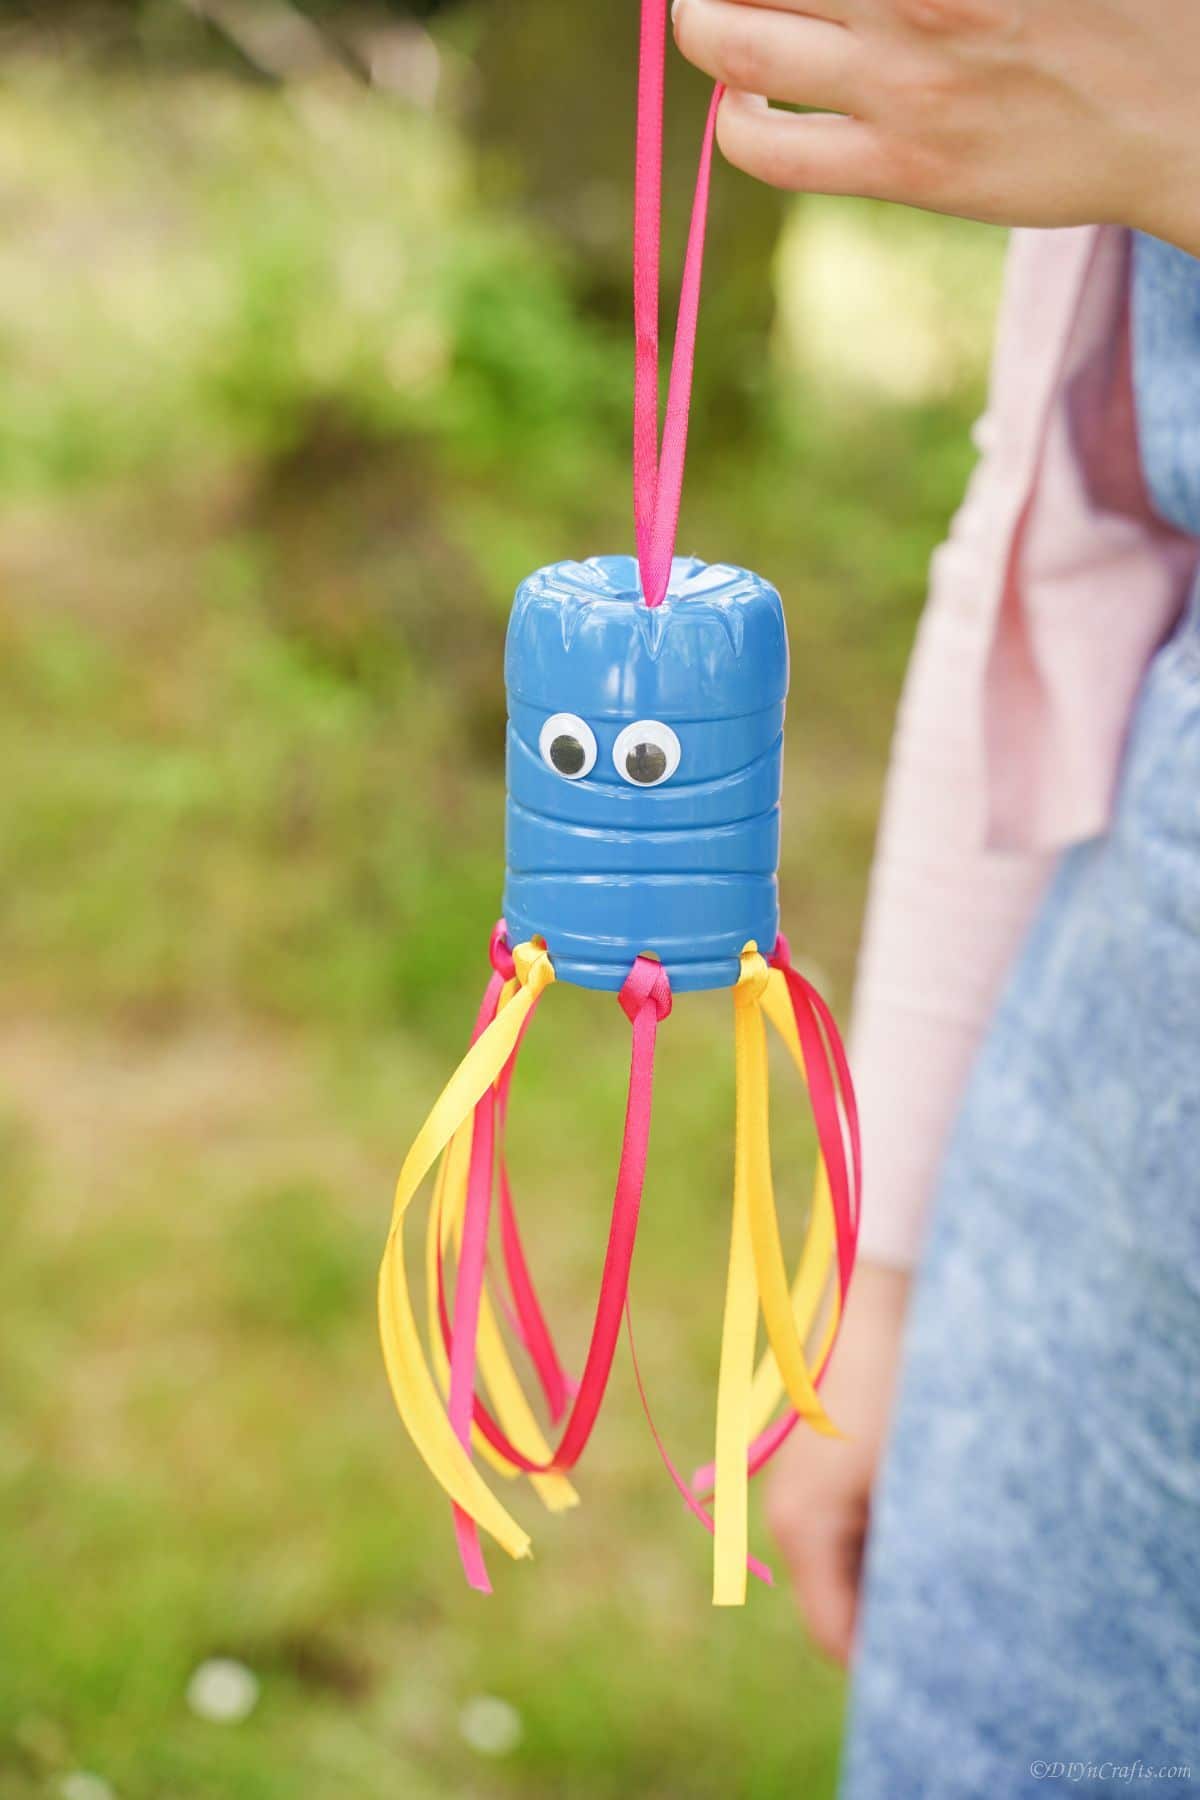 plastic bottle windsock hanging from woman hand